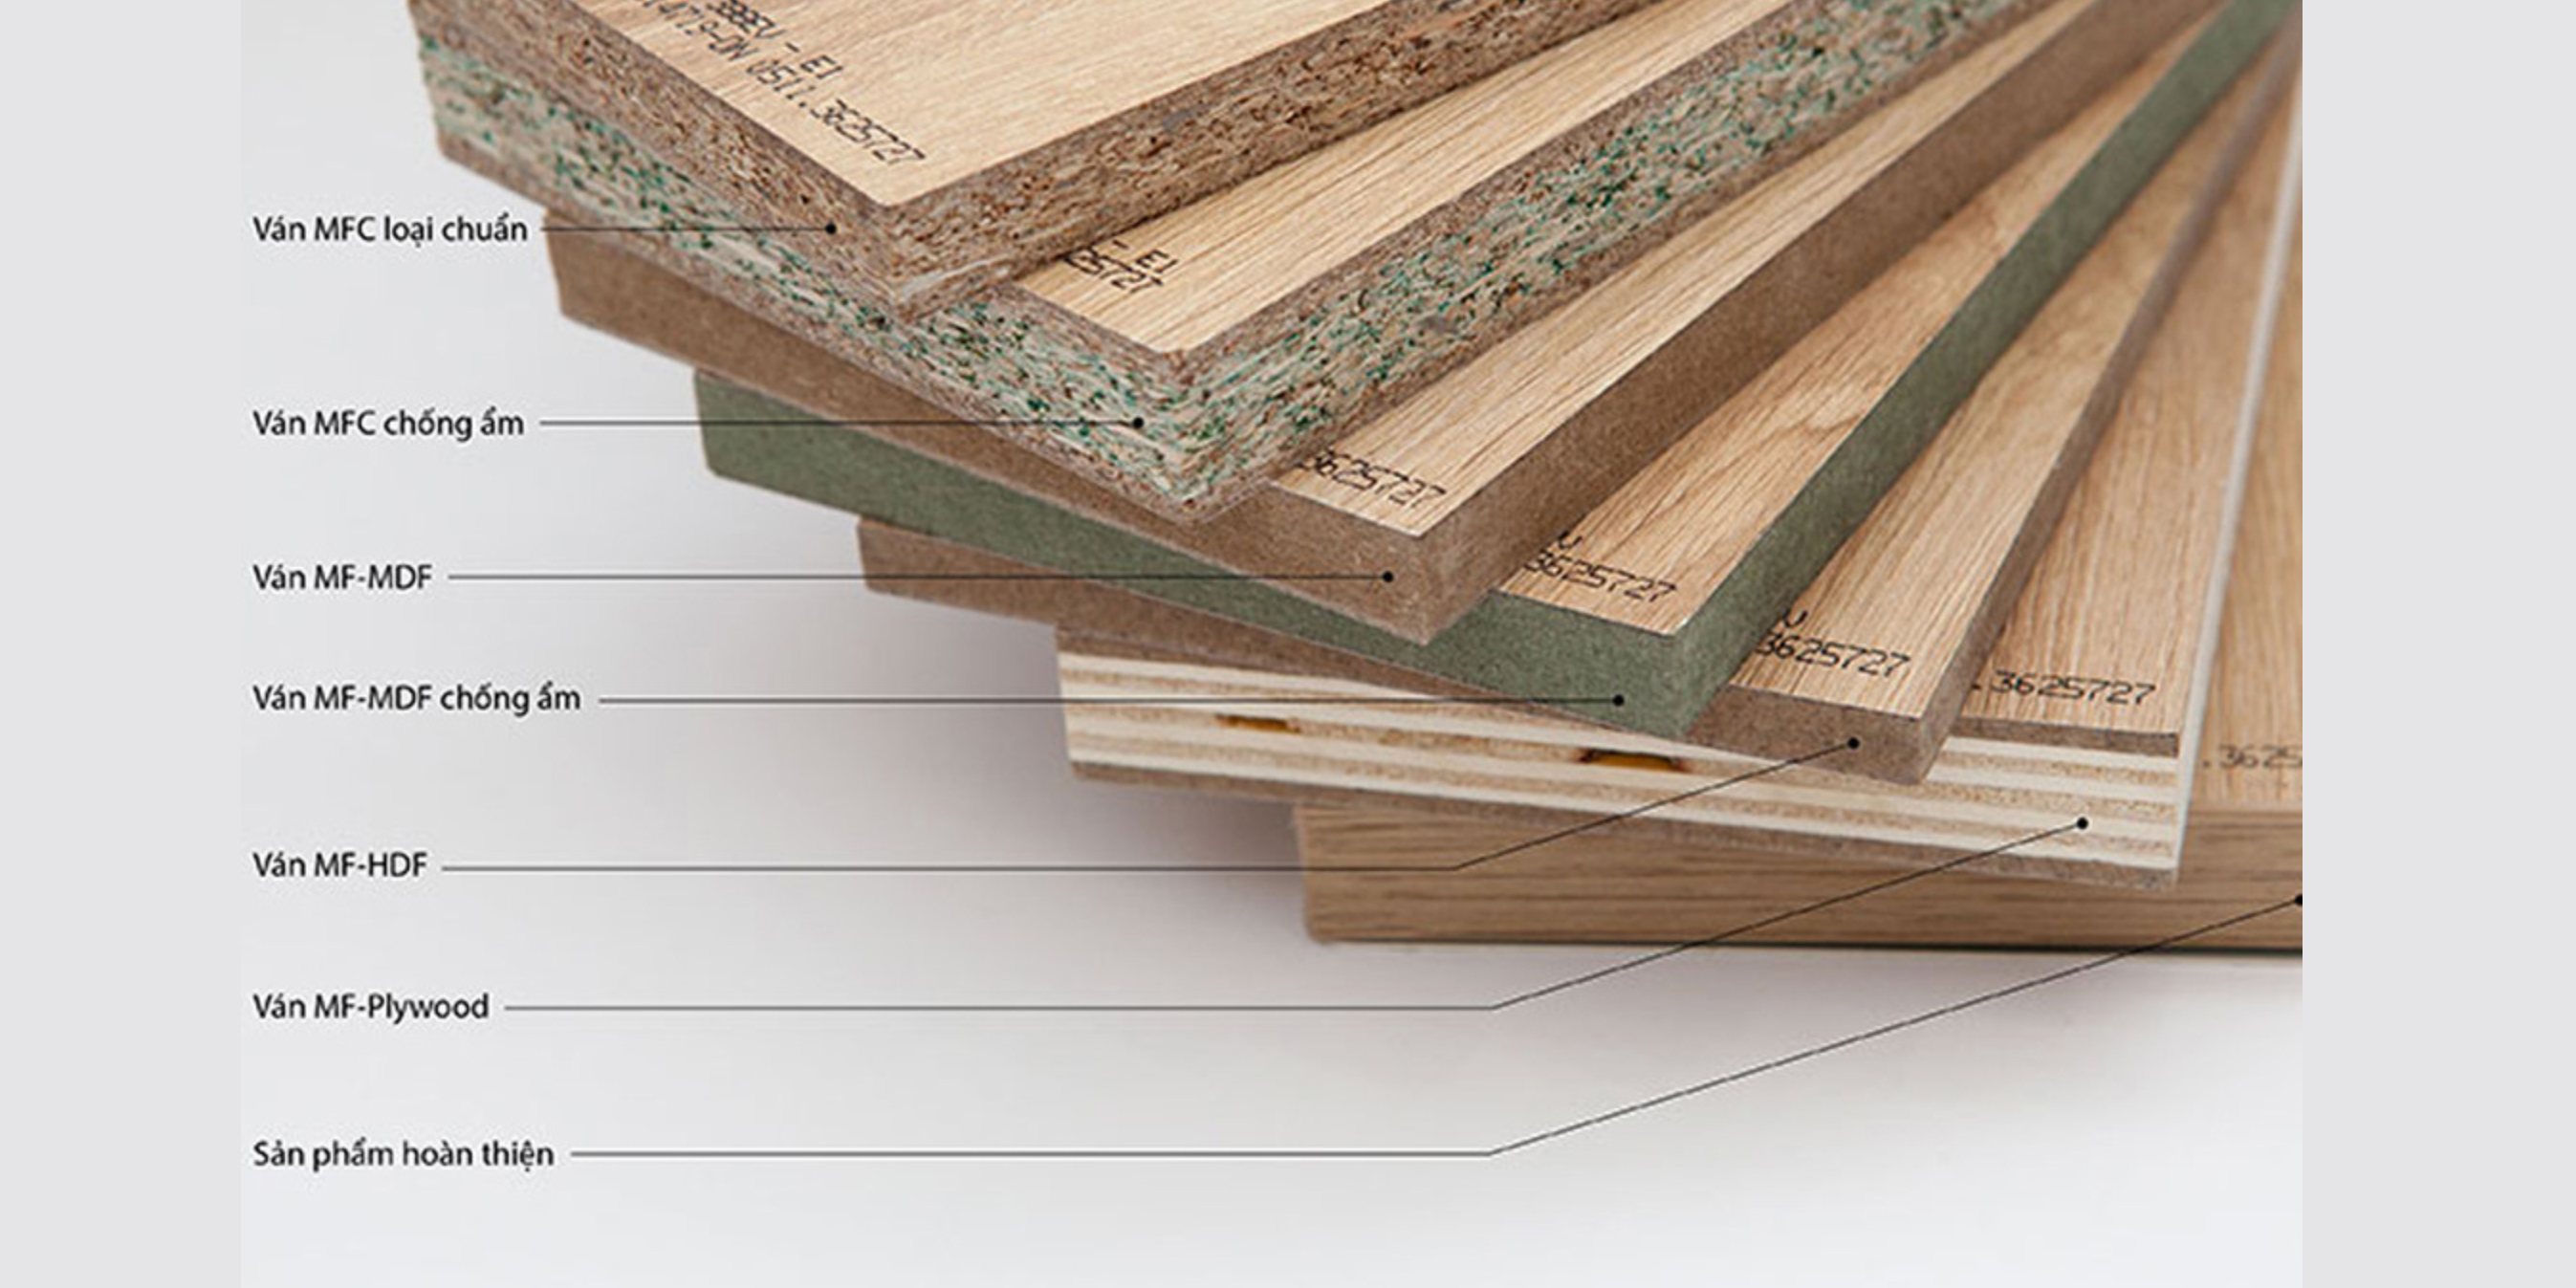 MFC, MDF, HDF AND PLYWOOD